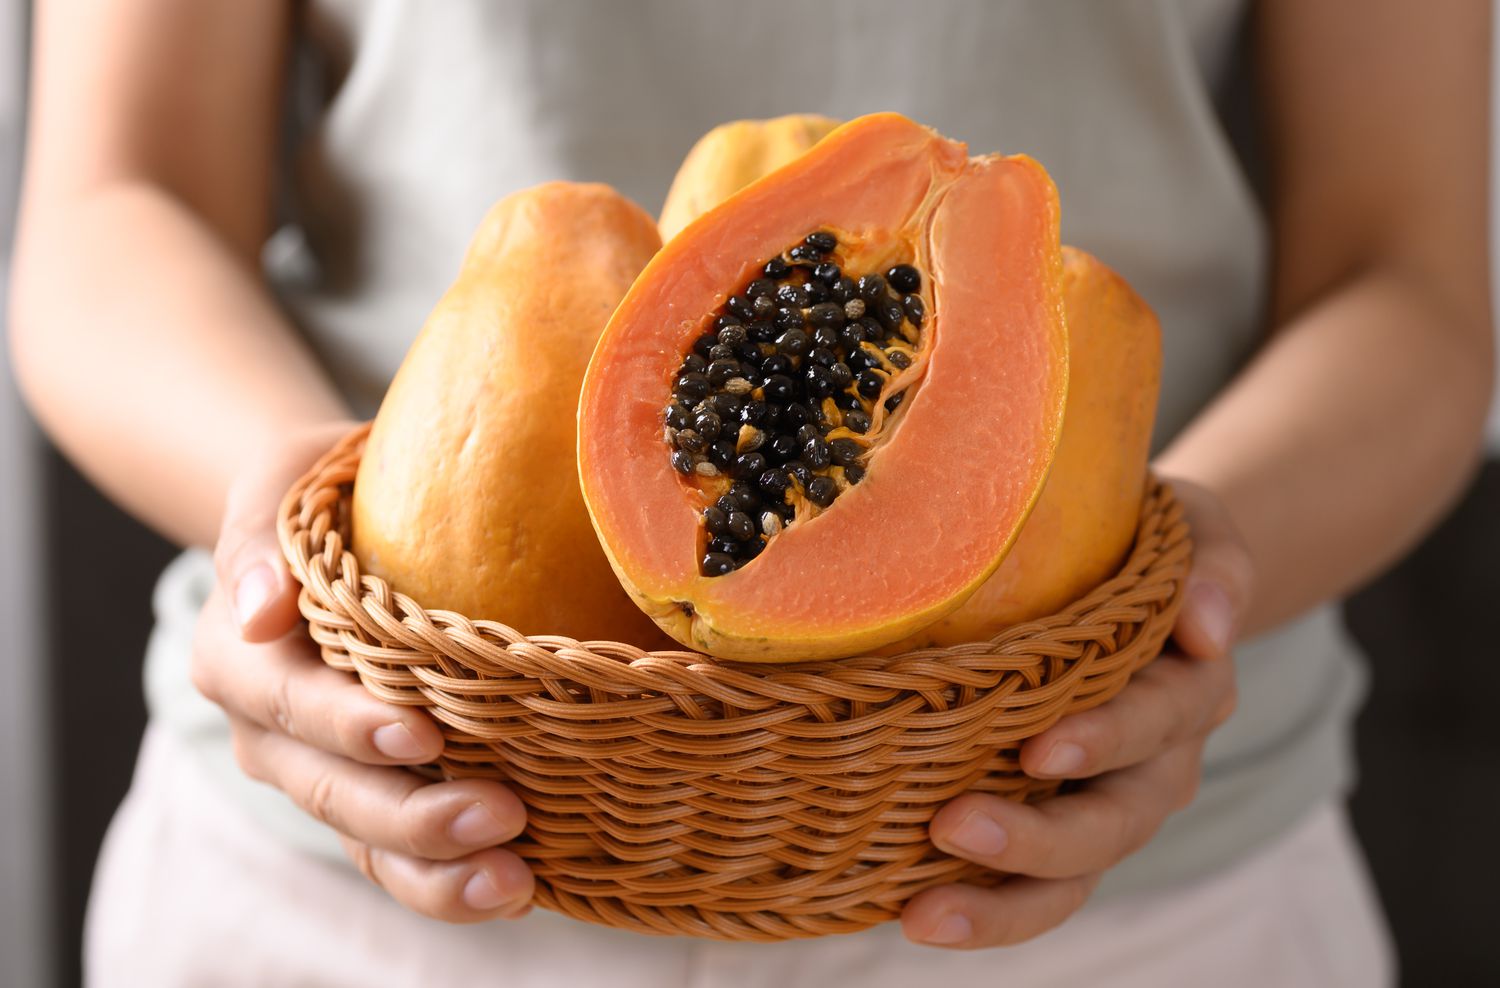 What Is Papaya Seed Good For